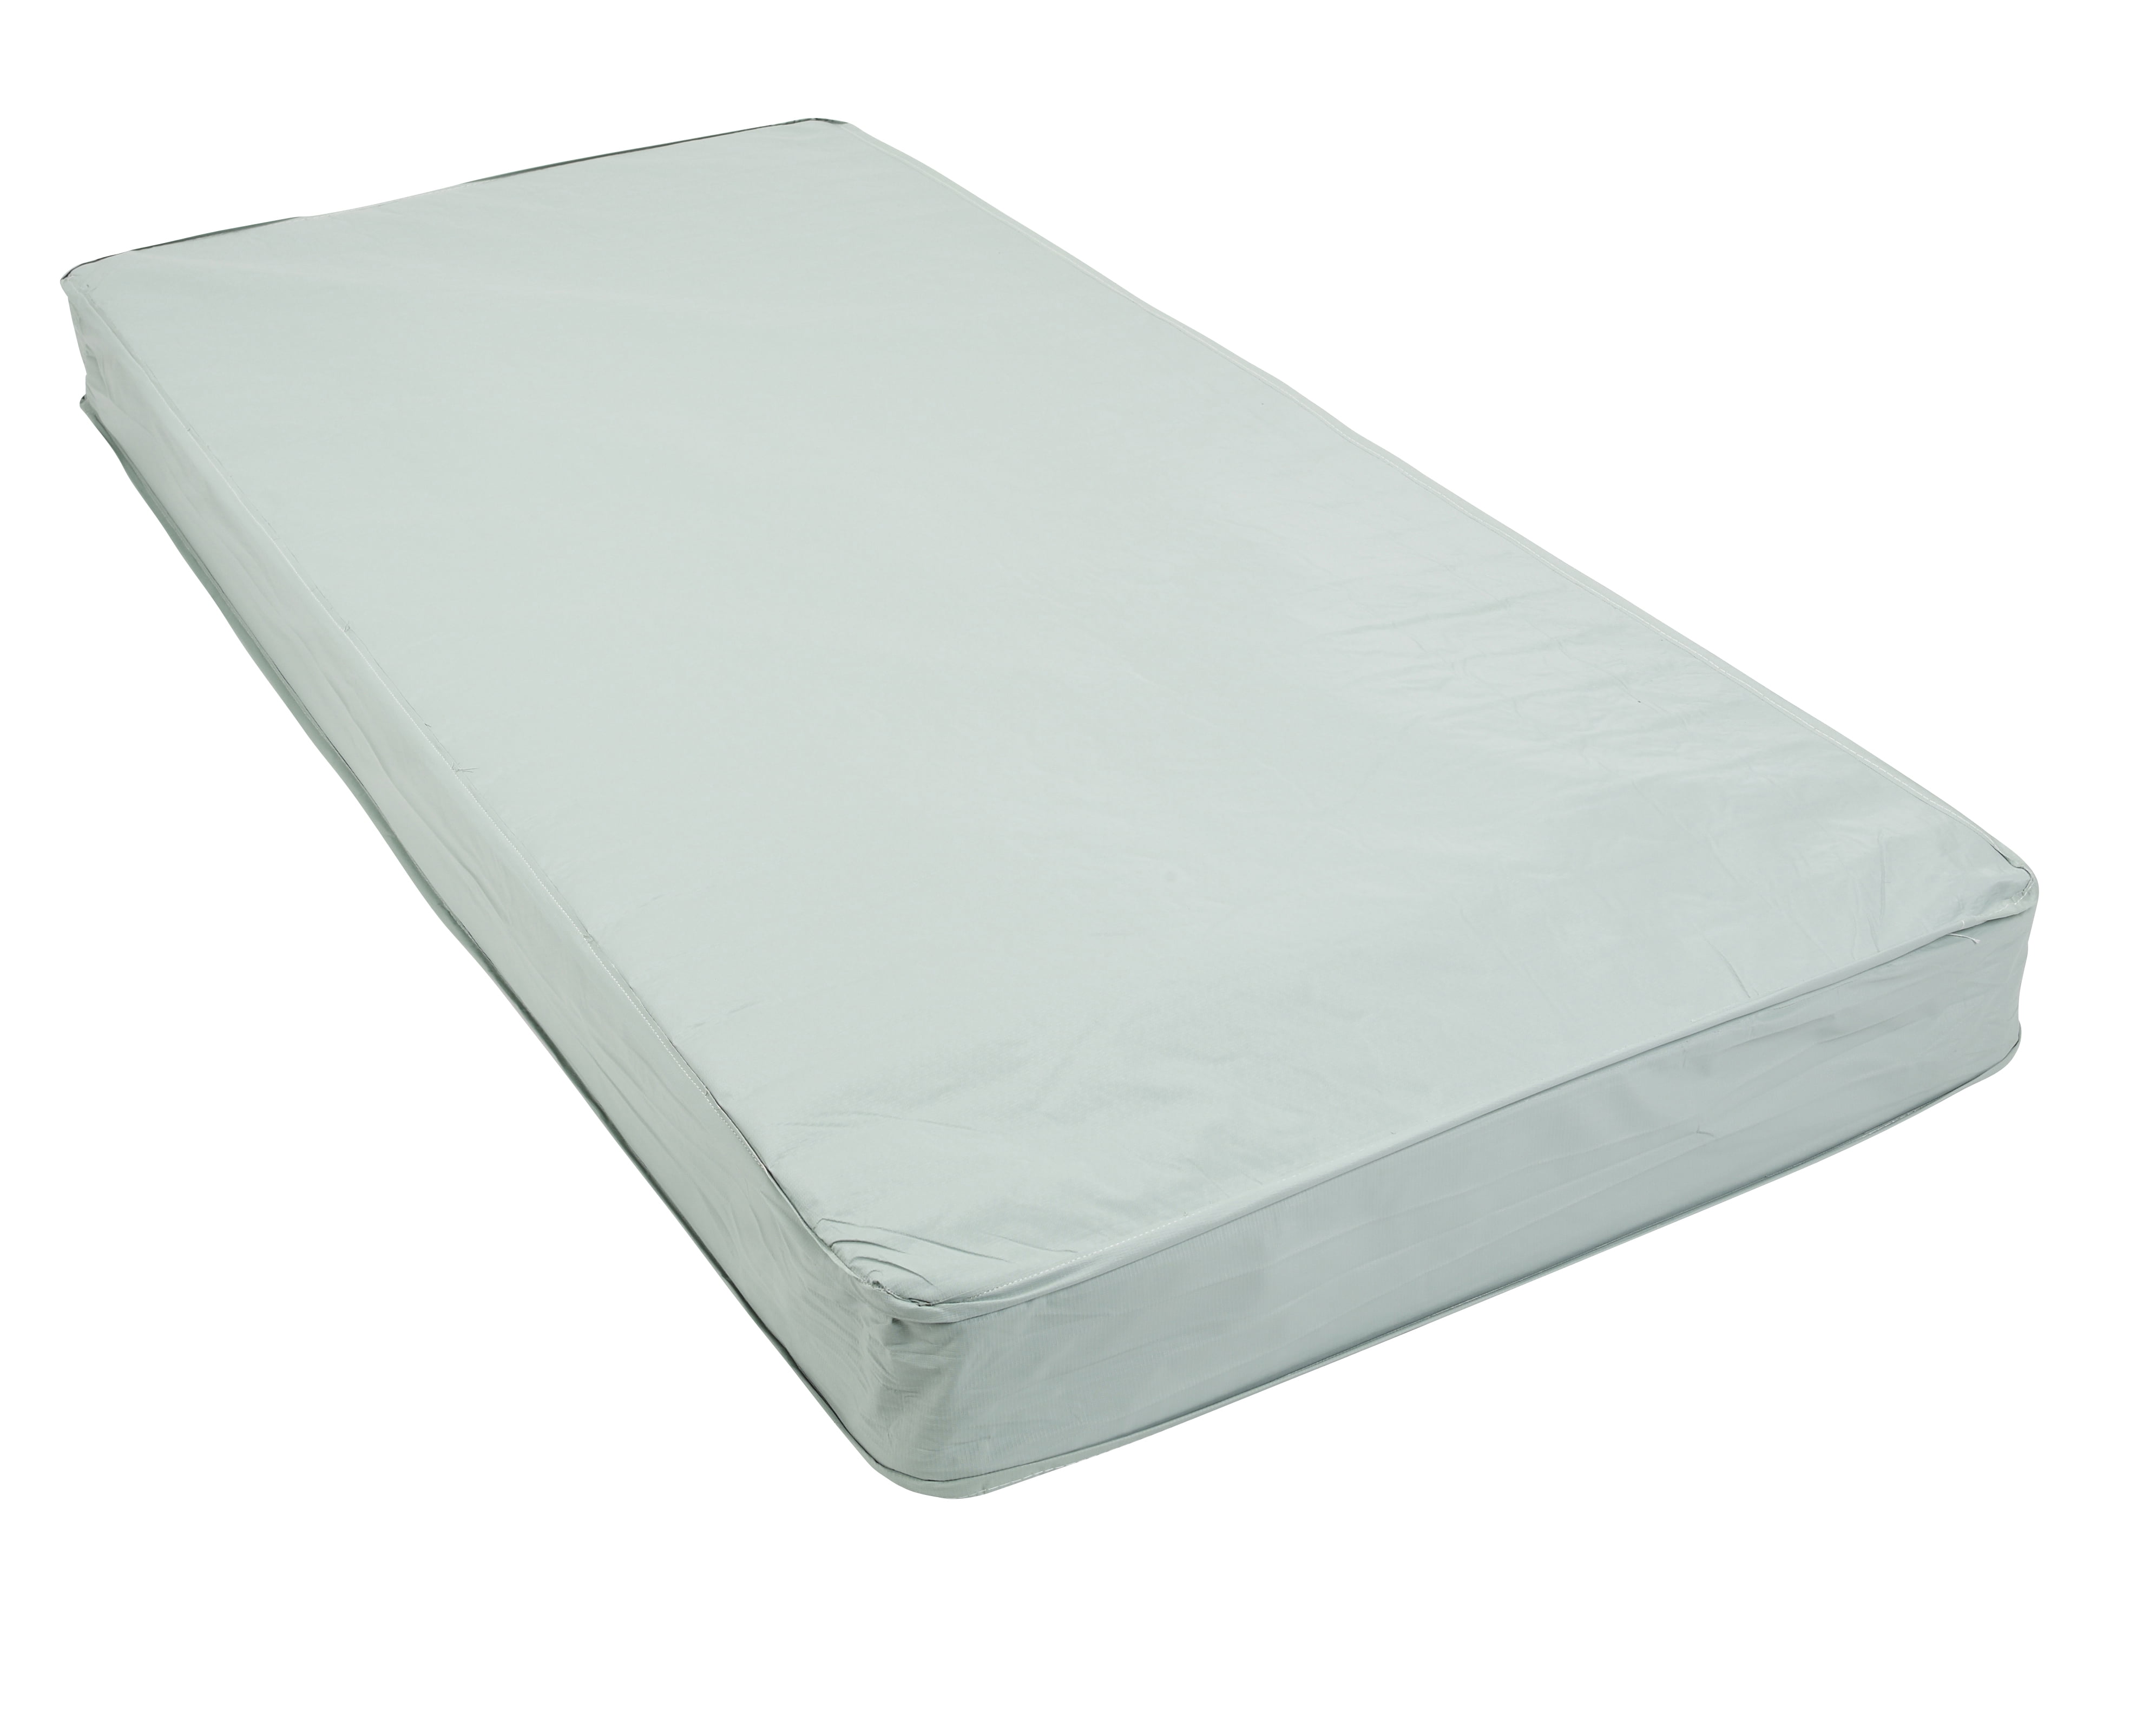 single bed innerspring mattress prices